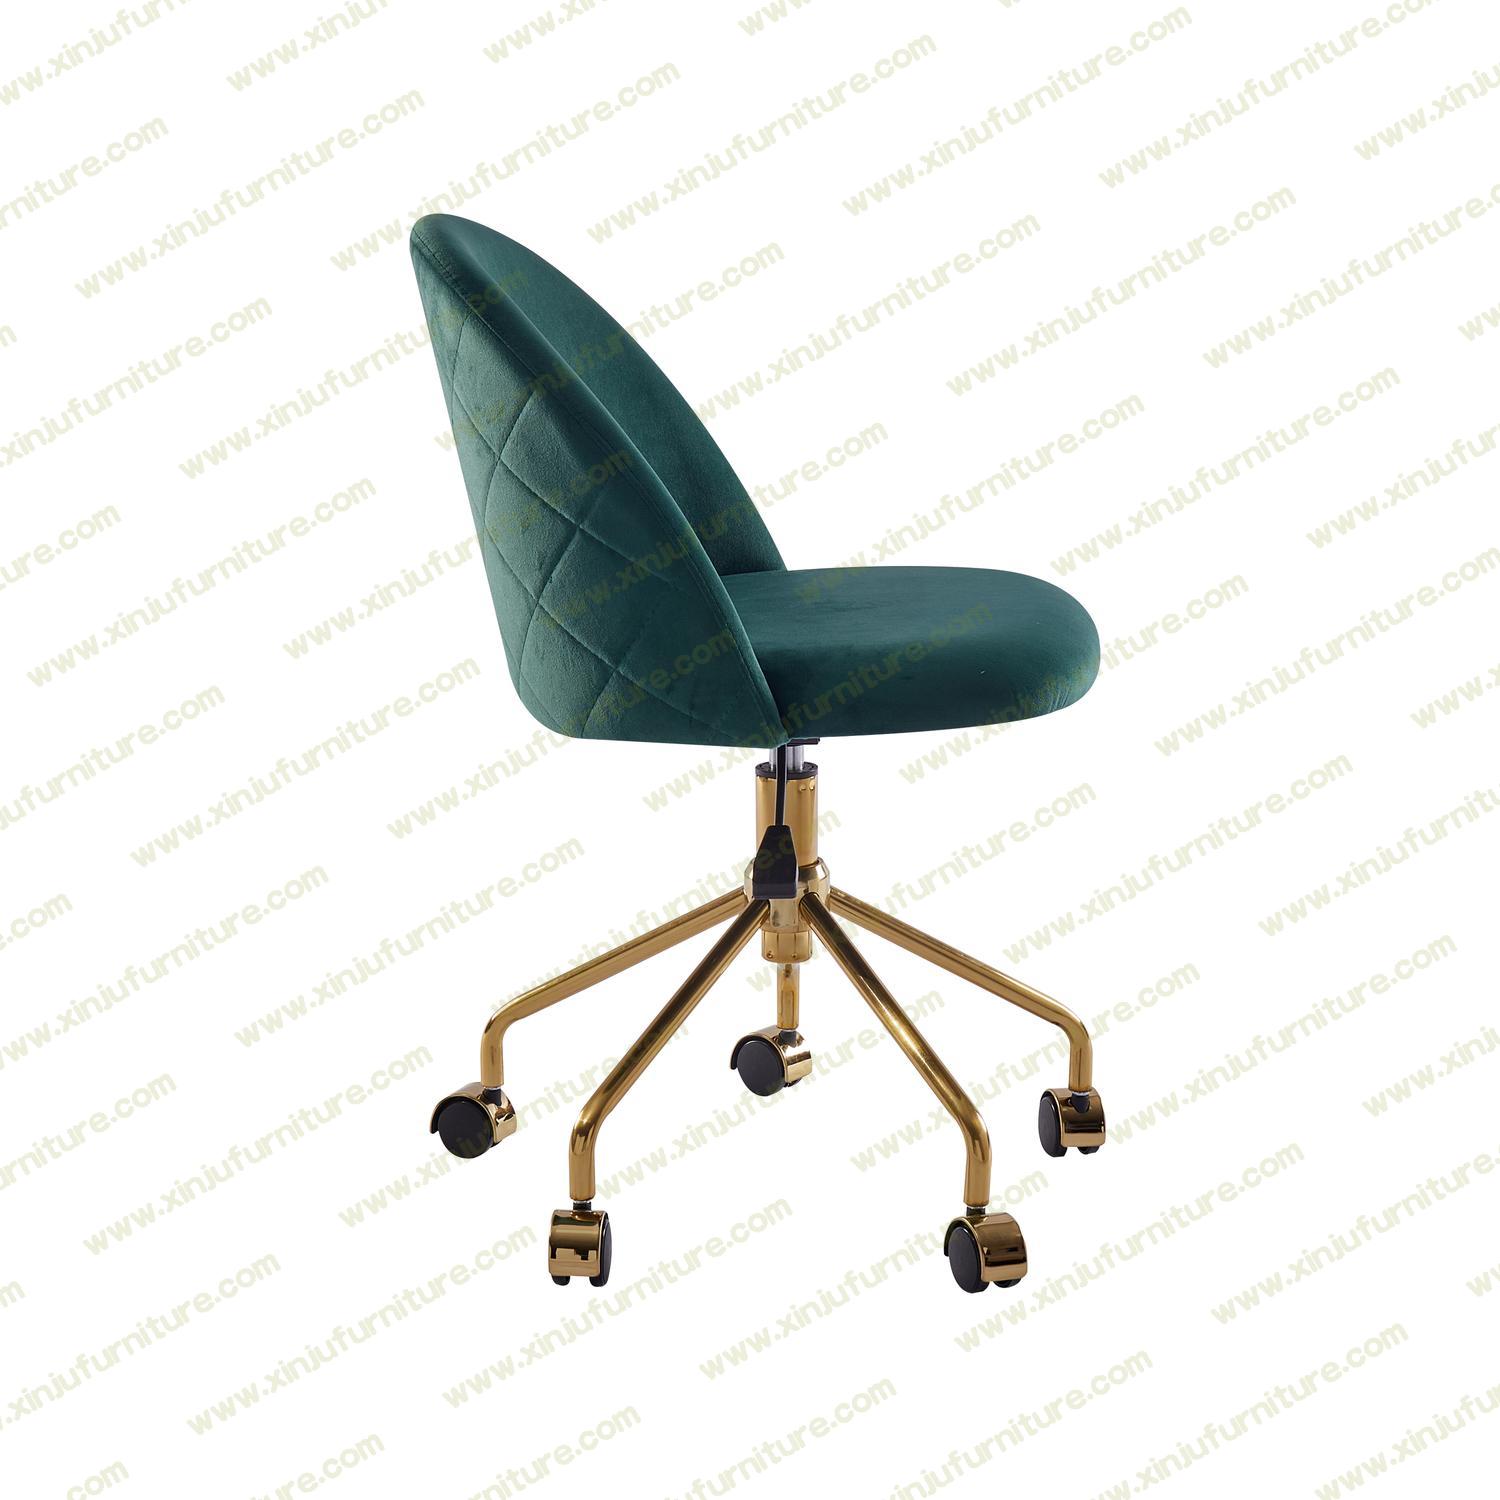 Adjustable office chair blue